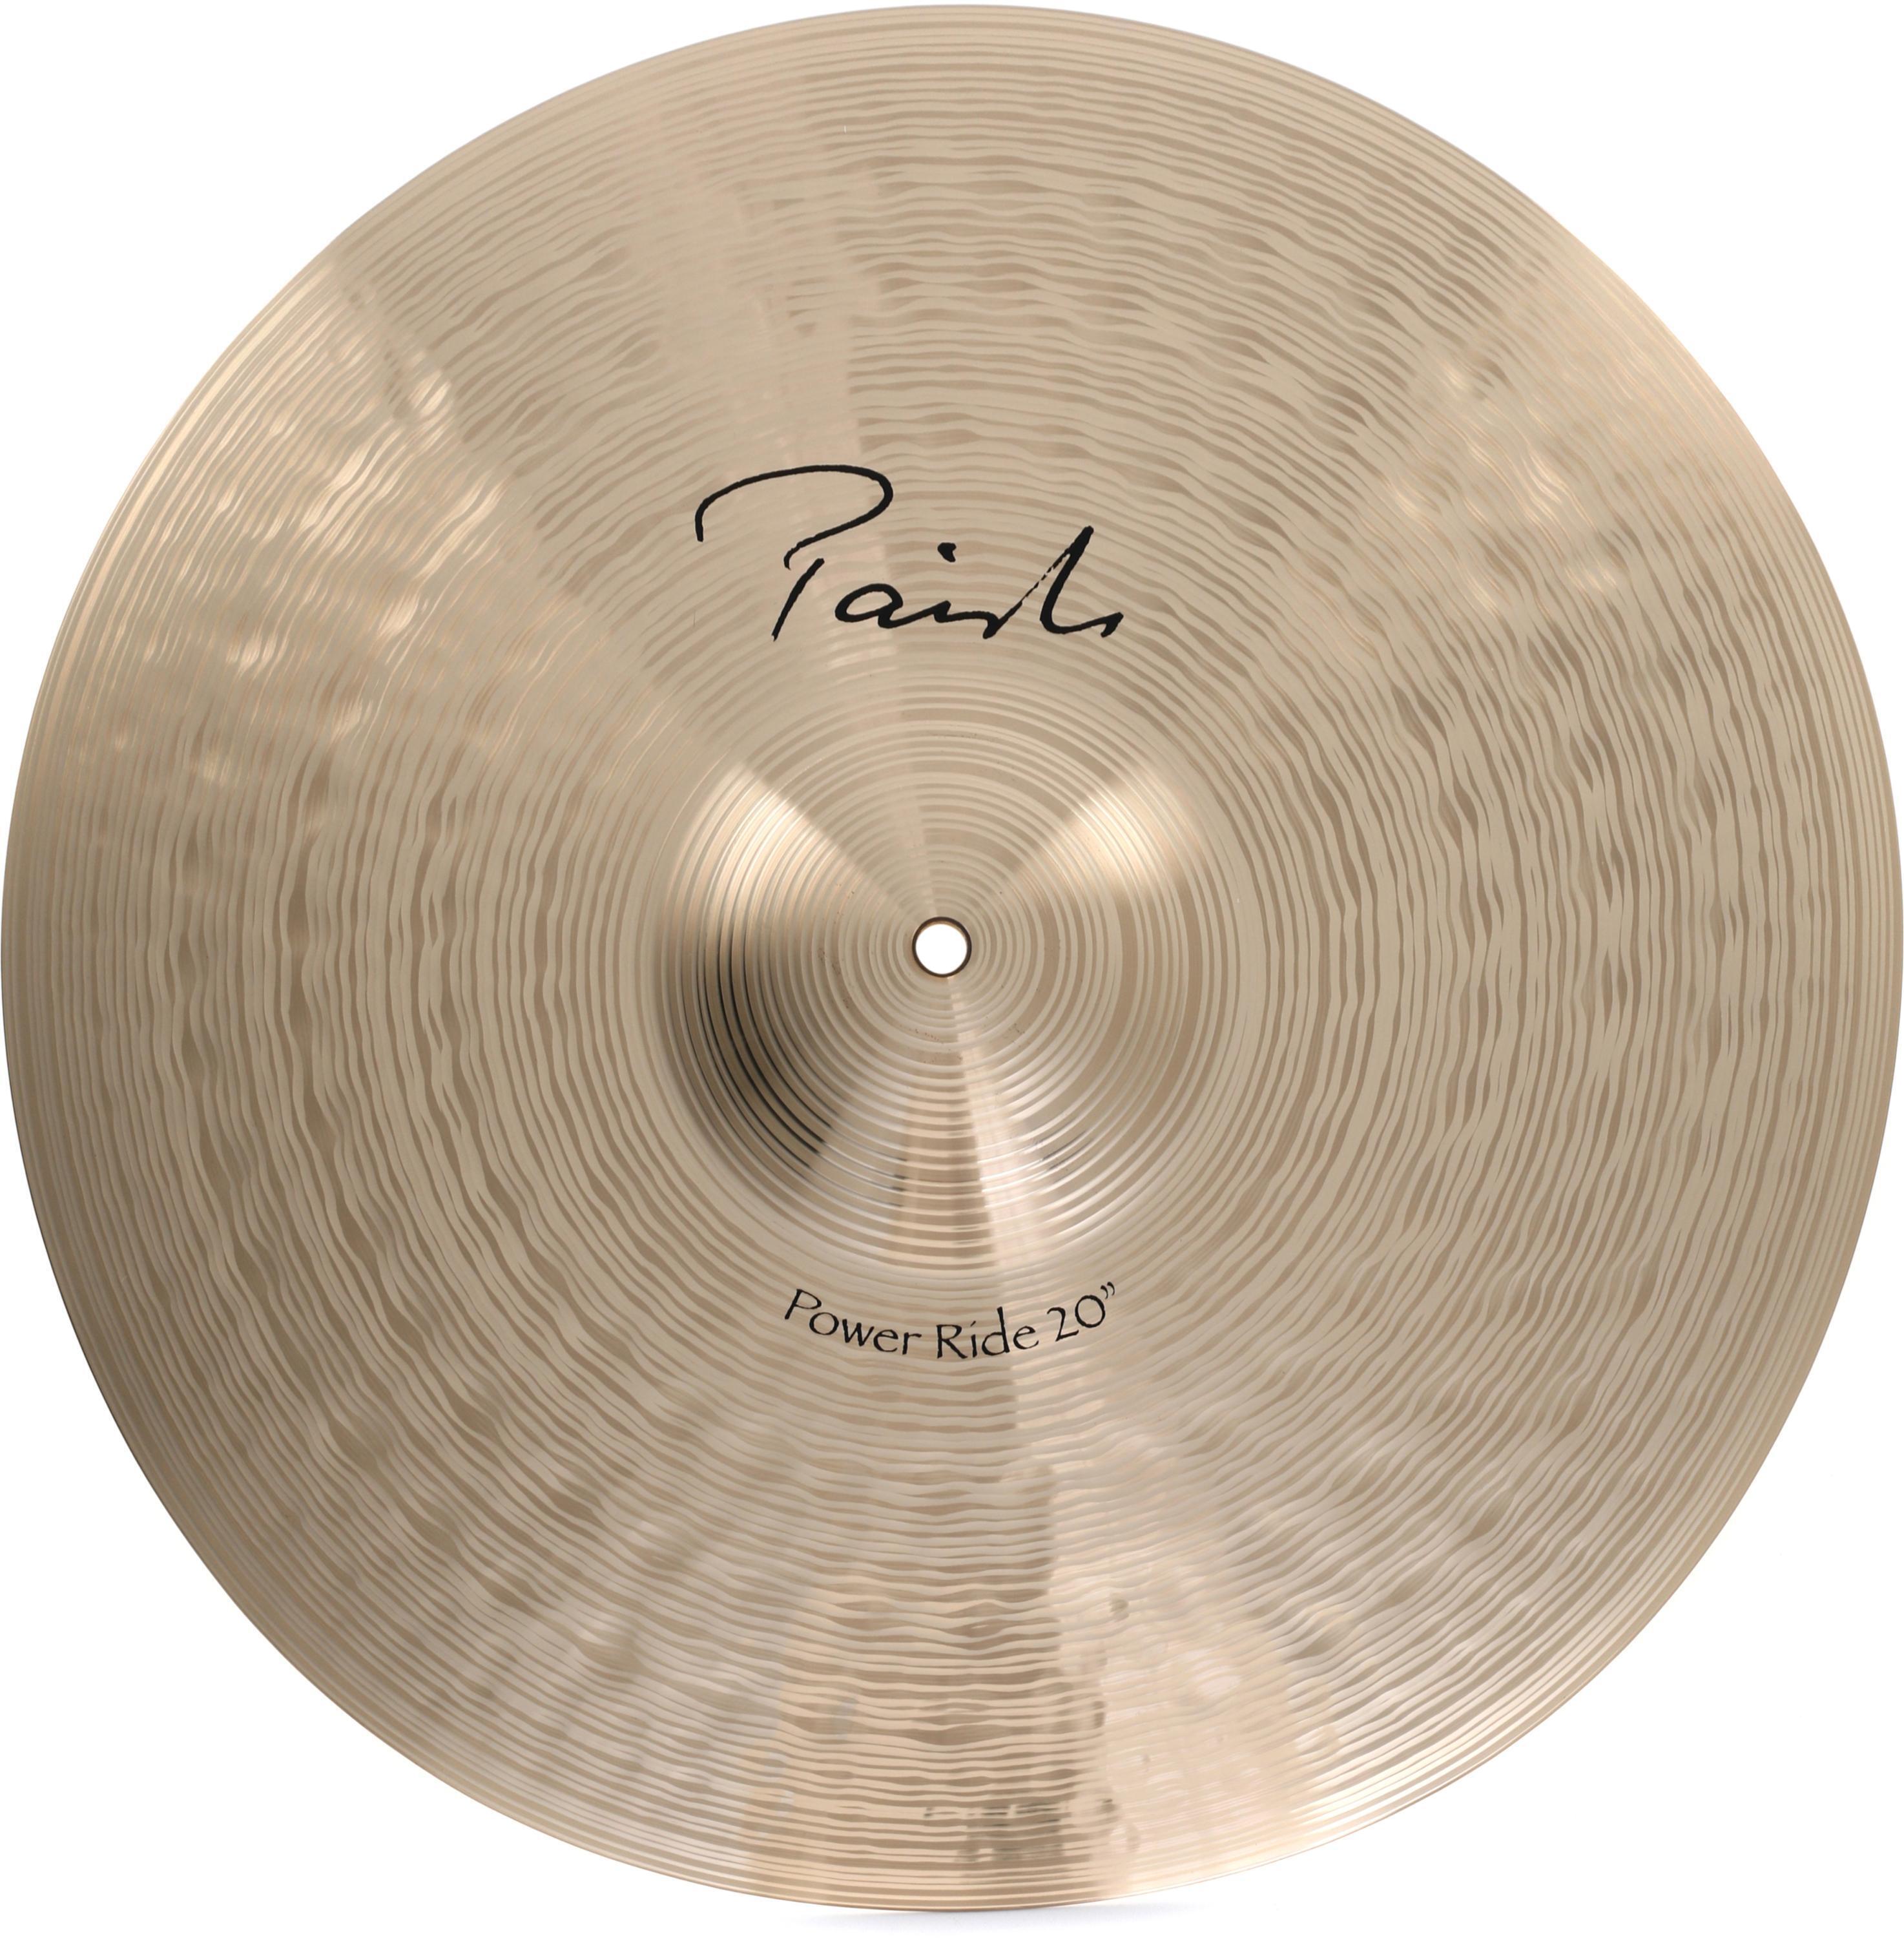 Paiste Signature Power Ride Cymbal - 20 inch | Sweetwater